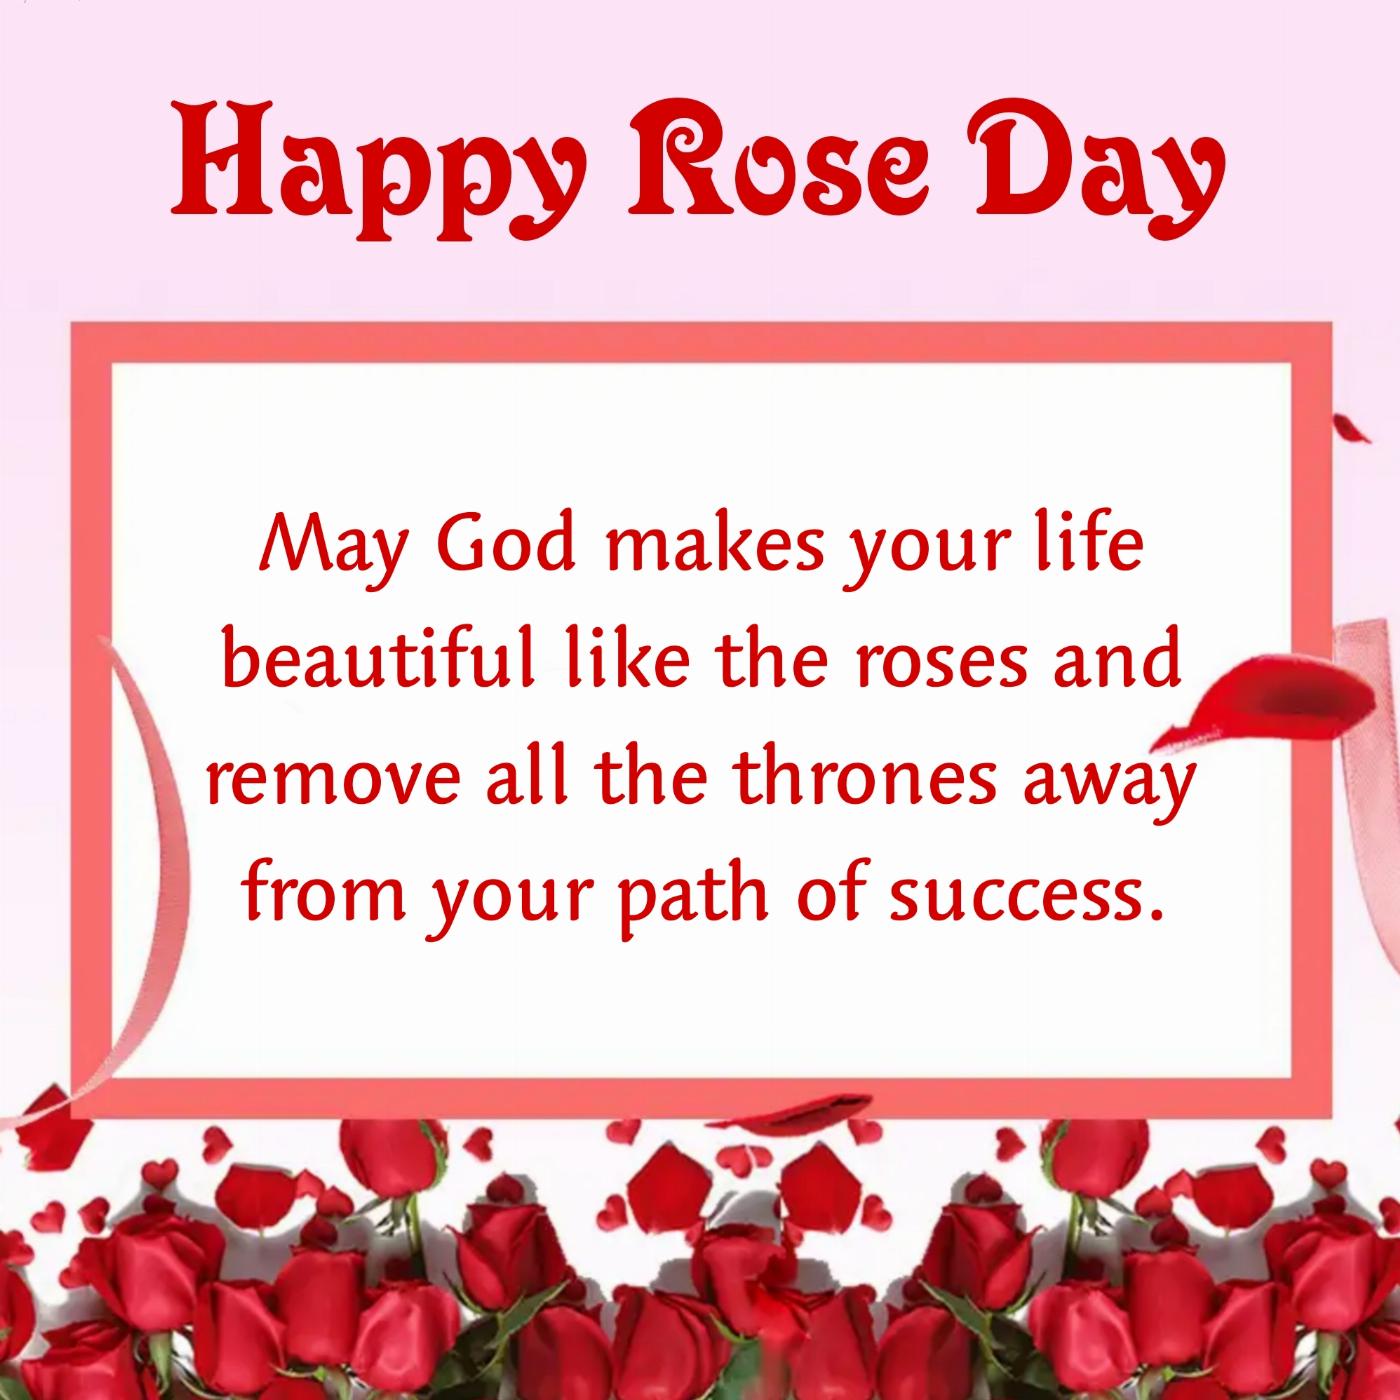 May God makes your life beautiful like the roses